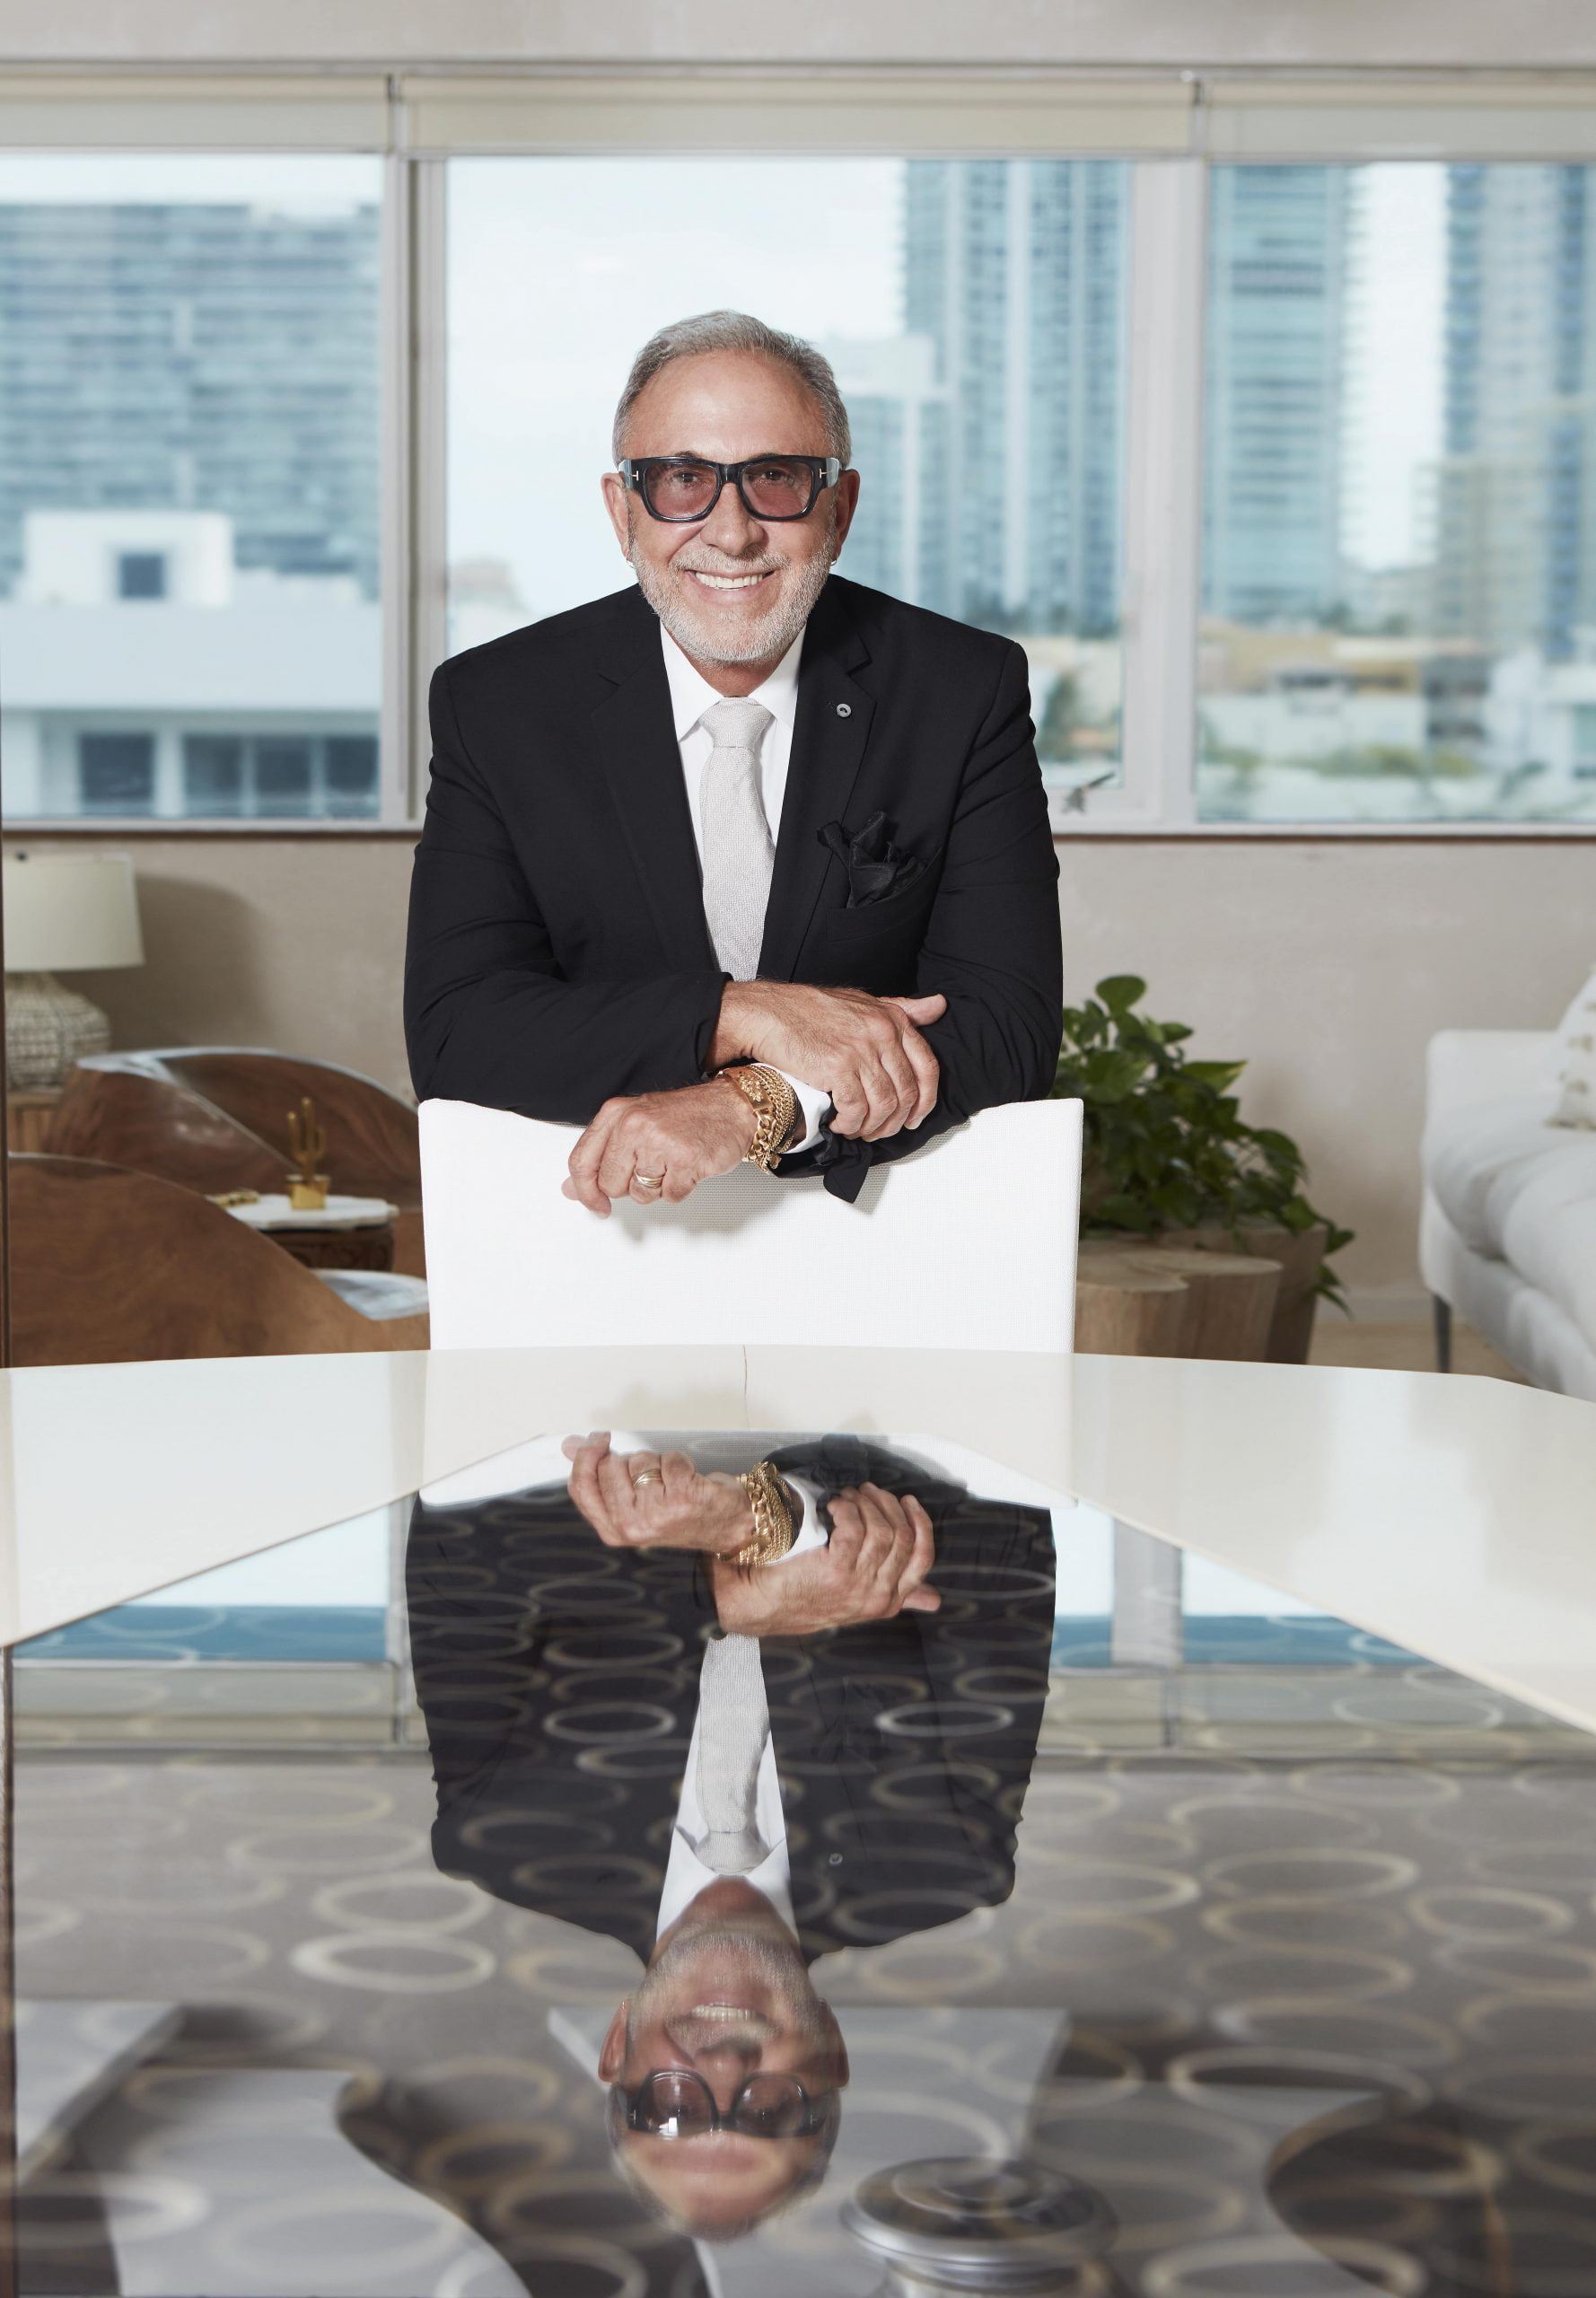 A multiple Grammy Award winner, Emilio Estefan is a musician, songwriter, record and television producer, best-selling author, filmmaker, and cultural ambassador. He has shaped and directed the careers of many musical talents, including Shakira, Ricky Martin, Marc Anthony, Jon Secada and Jennifer López.